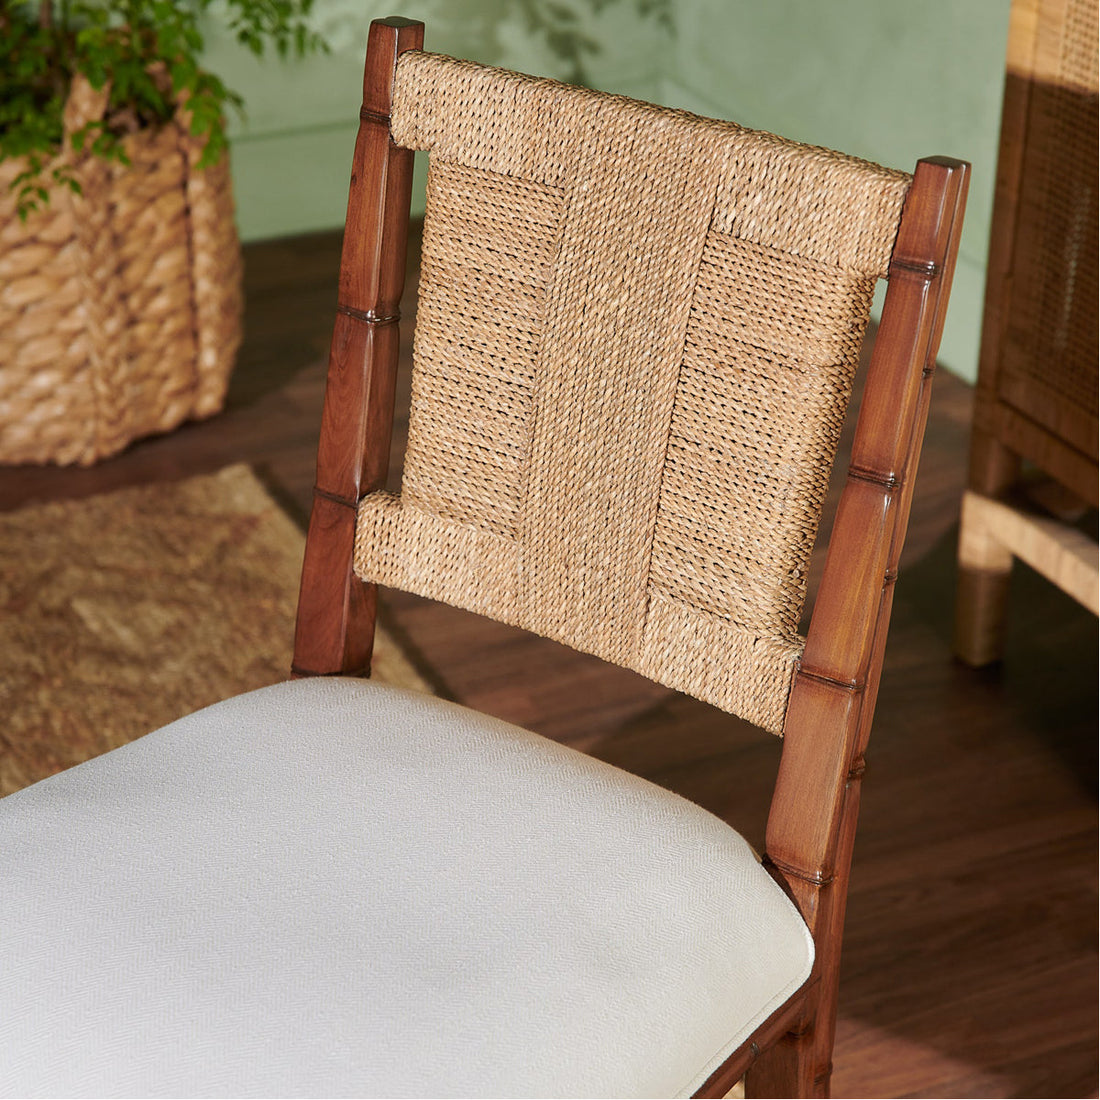 Made Goods Kiera Dining Chair in Humboldt Cotton Jute